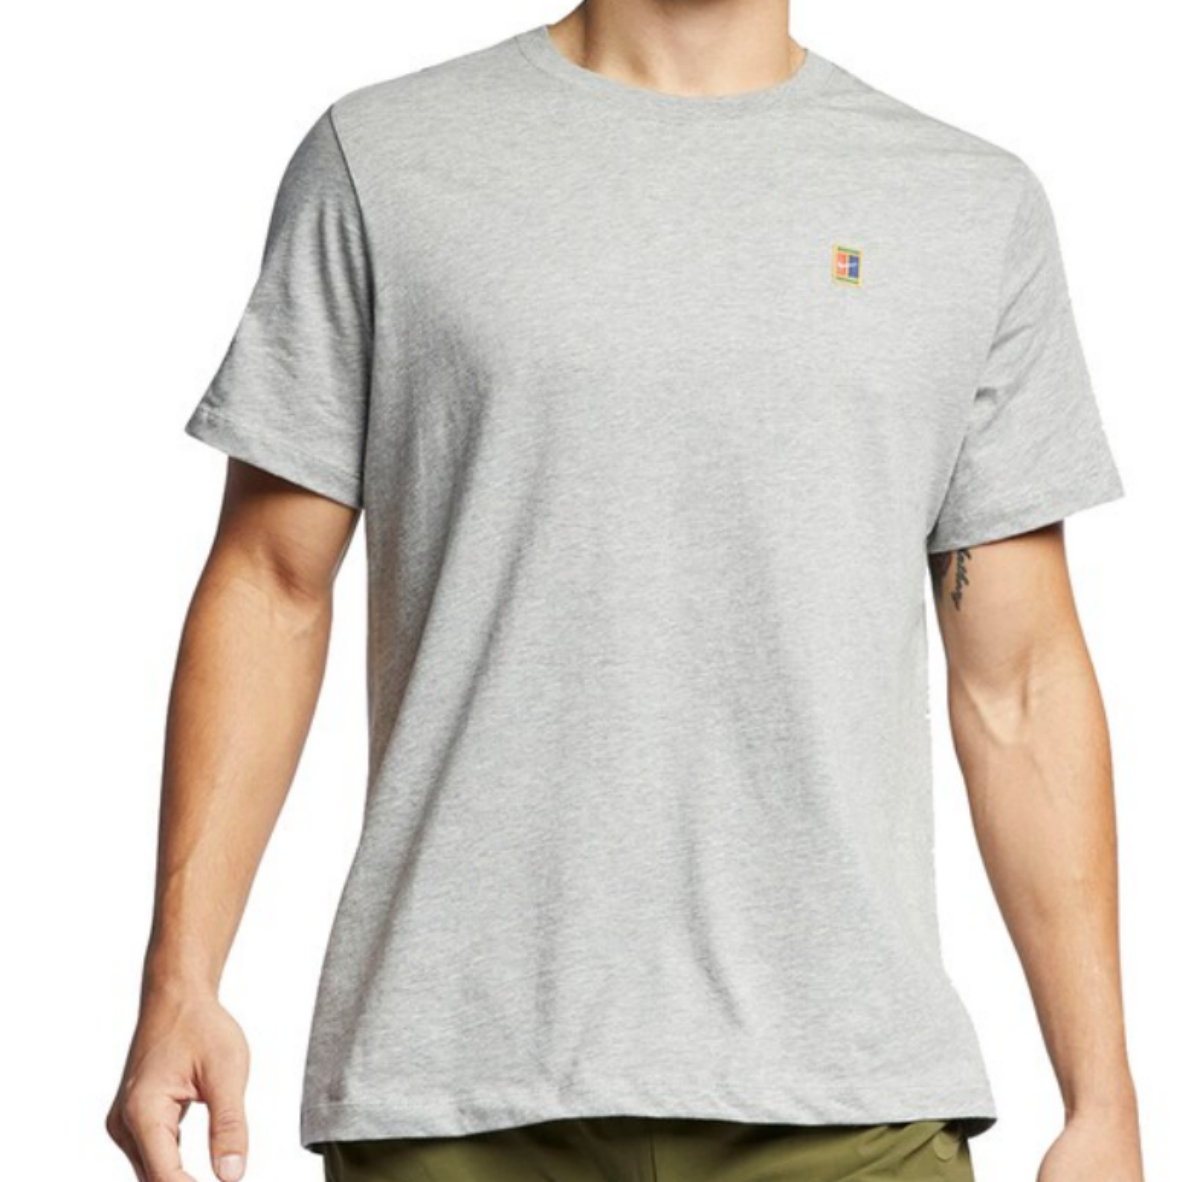 Up to 70% Off Nike Clearance Apparel 